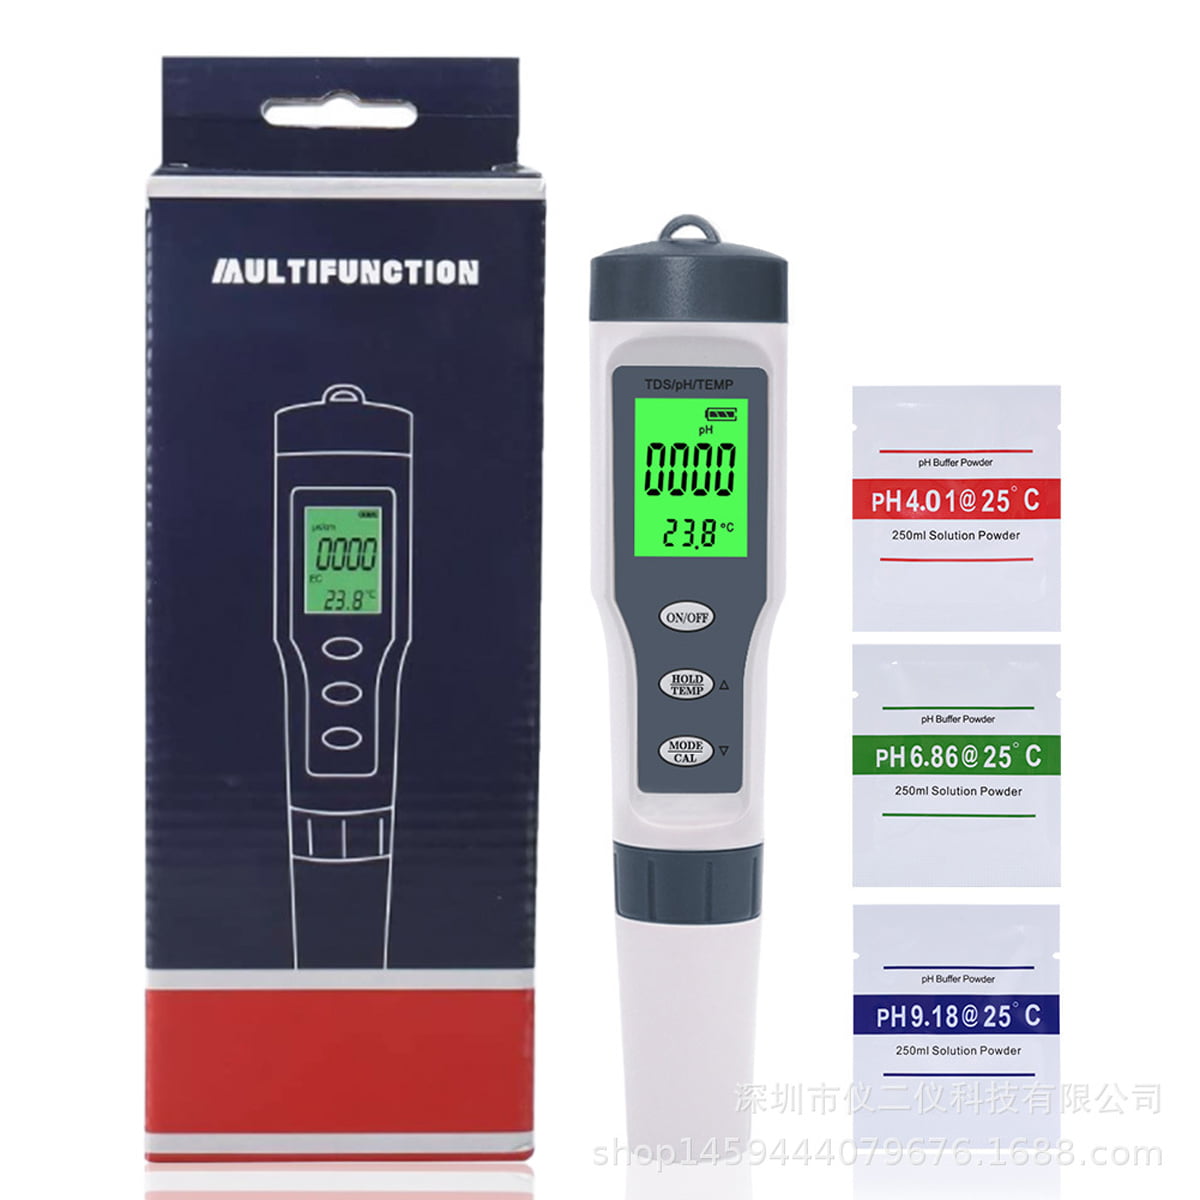 Auto Calibration High Precision PH Meter Digital Water Quality Meter 3 in 1 TDS/PH/TEMP Meter Auto-Shutdown LCD Display Ideal for Drinking Water/Swimming Pool/Aquarium/Pools 